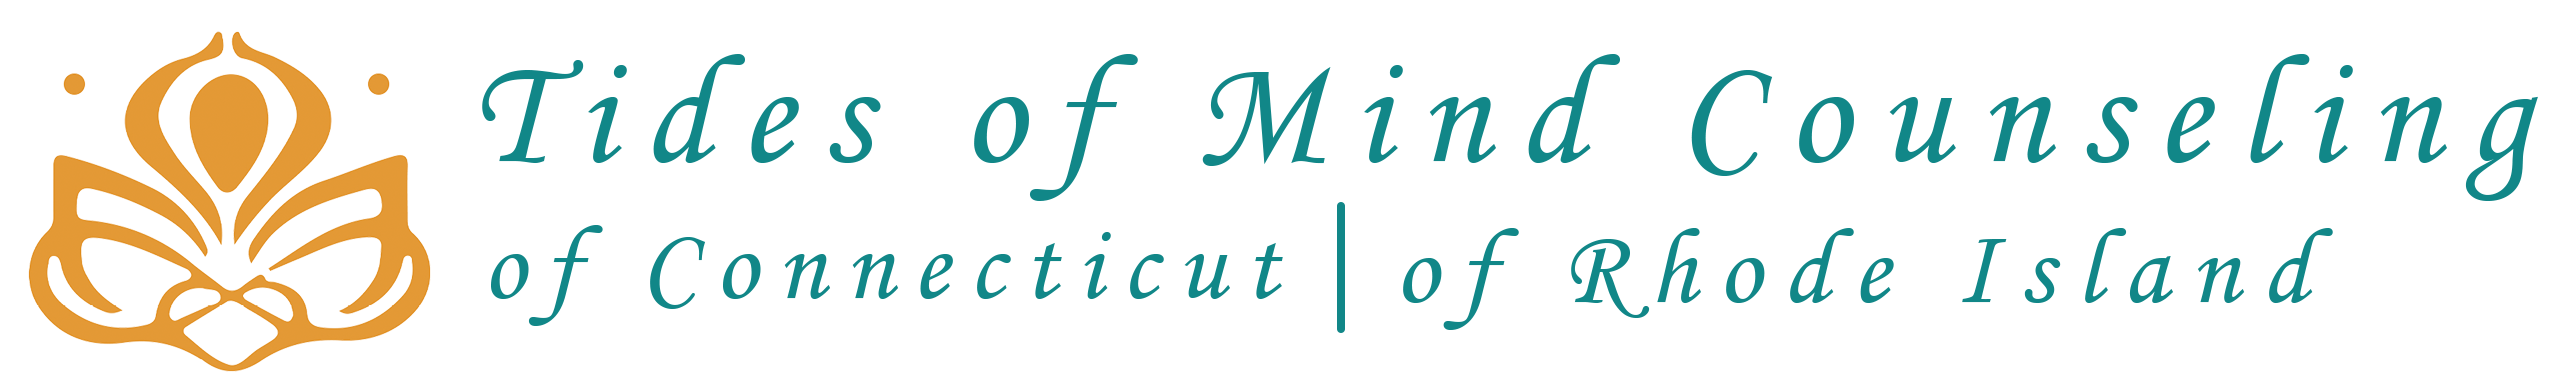 Tides of Mind Counseling of Connecticut and Rhode Island